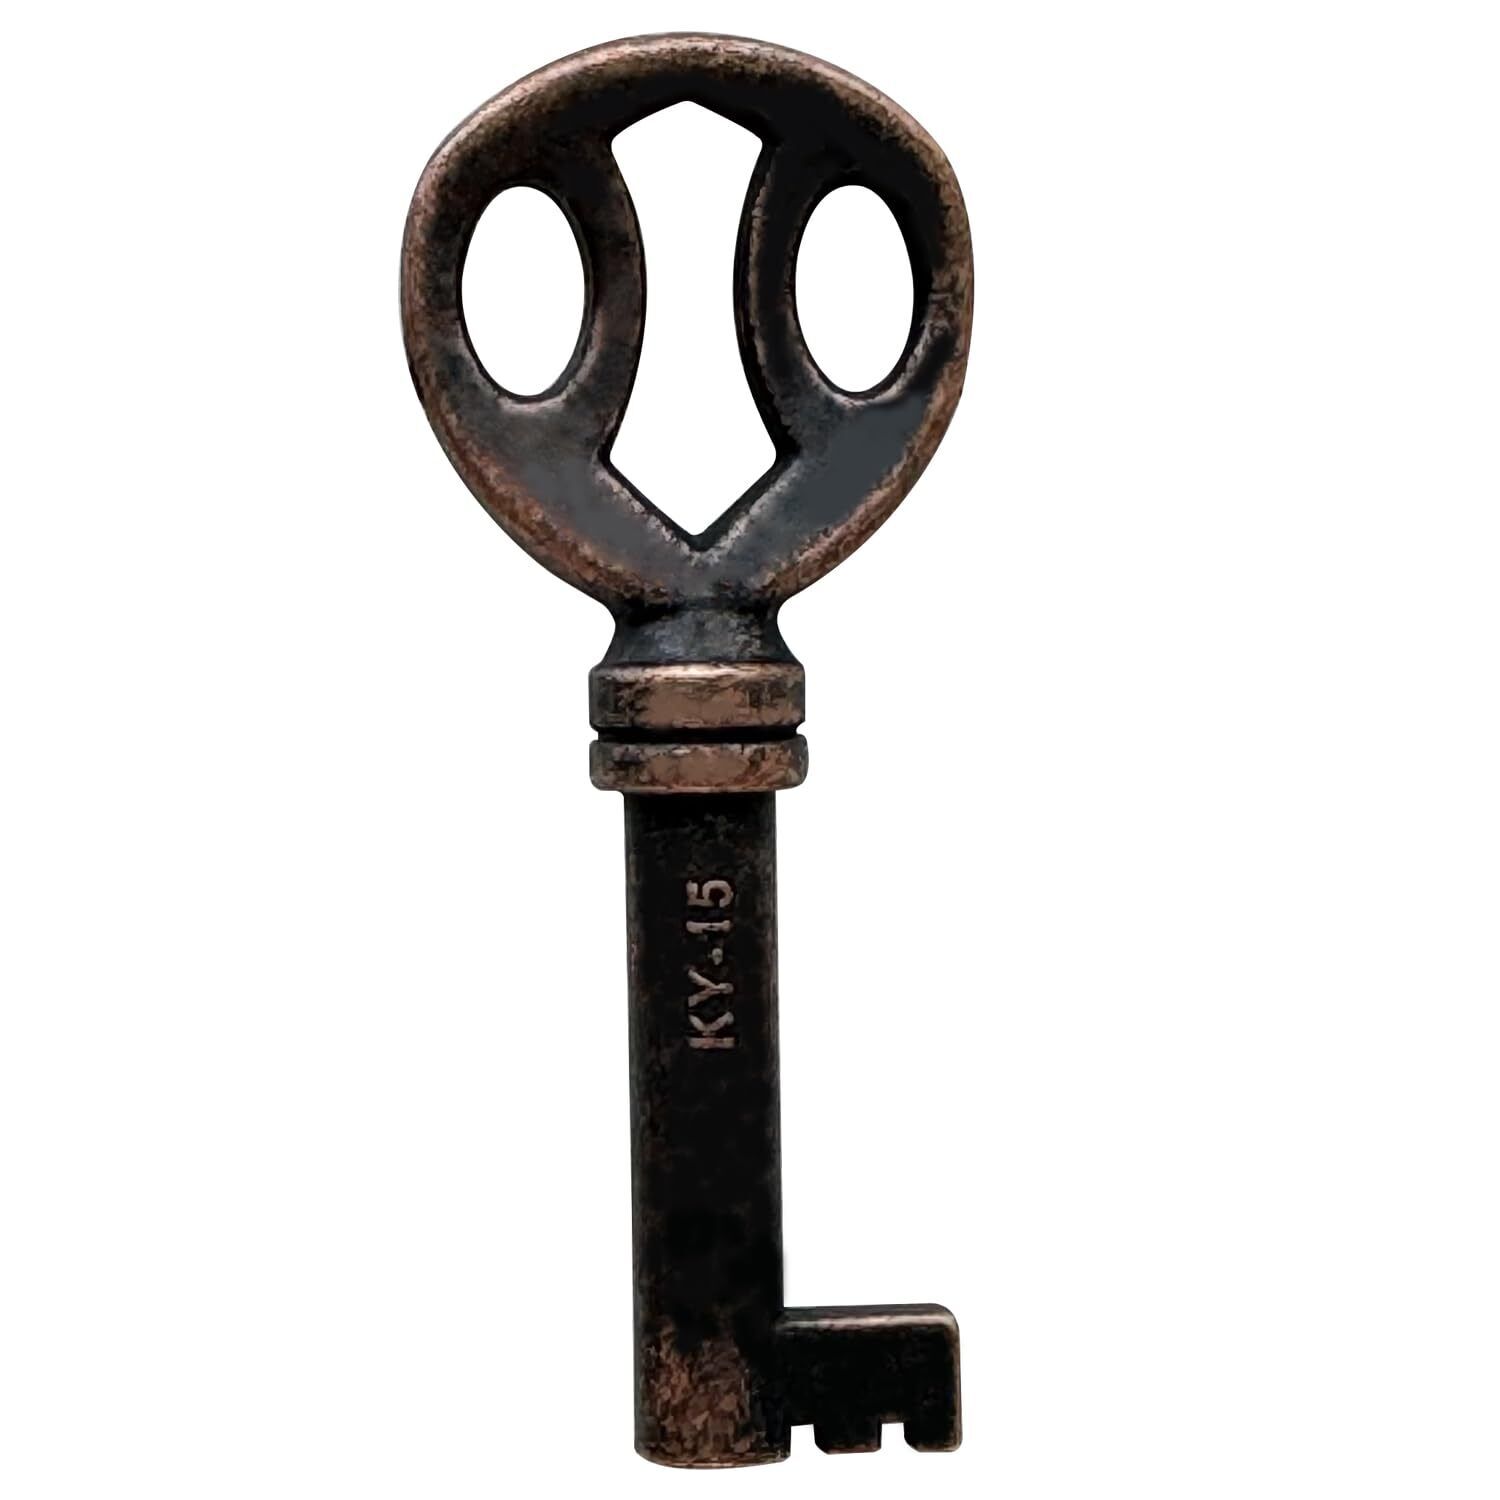 KY-15 Hollow Barrel Antique Skeleton Key for Many China Cabinets Dressers and...